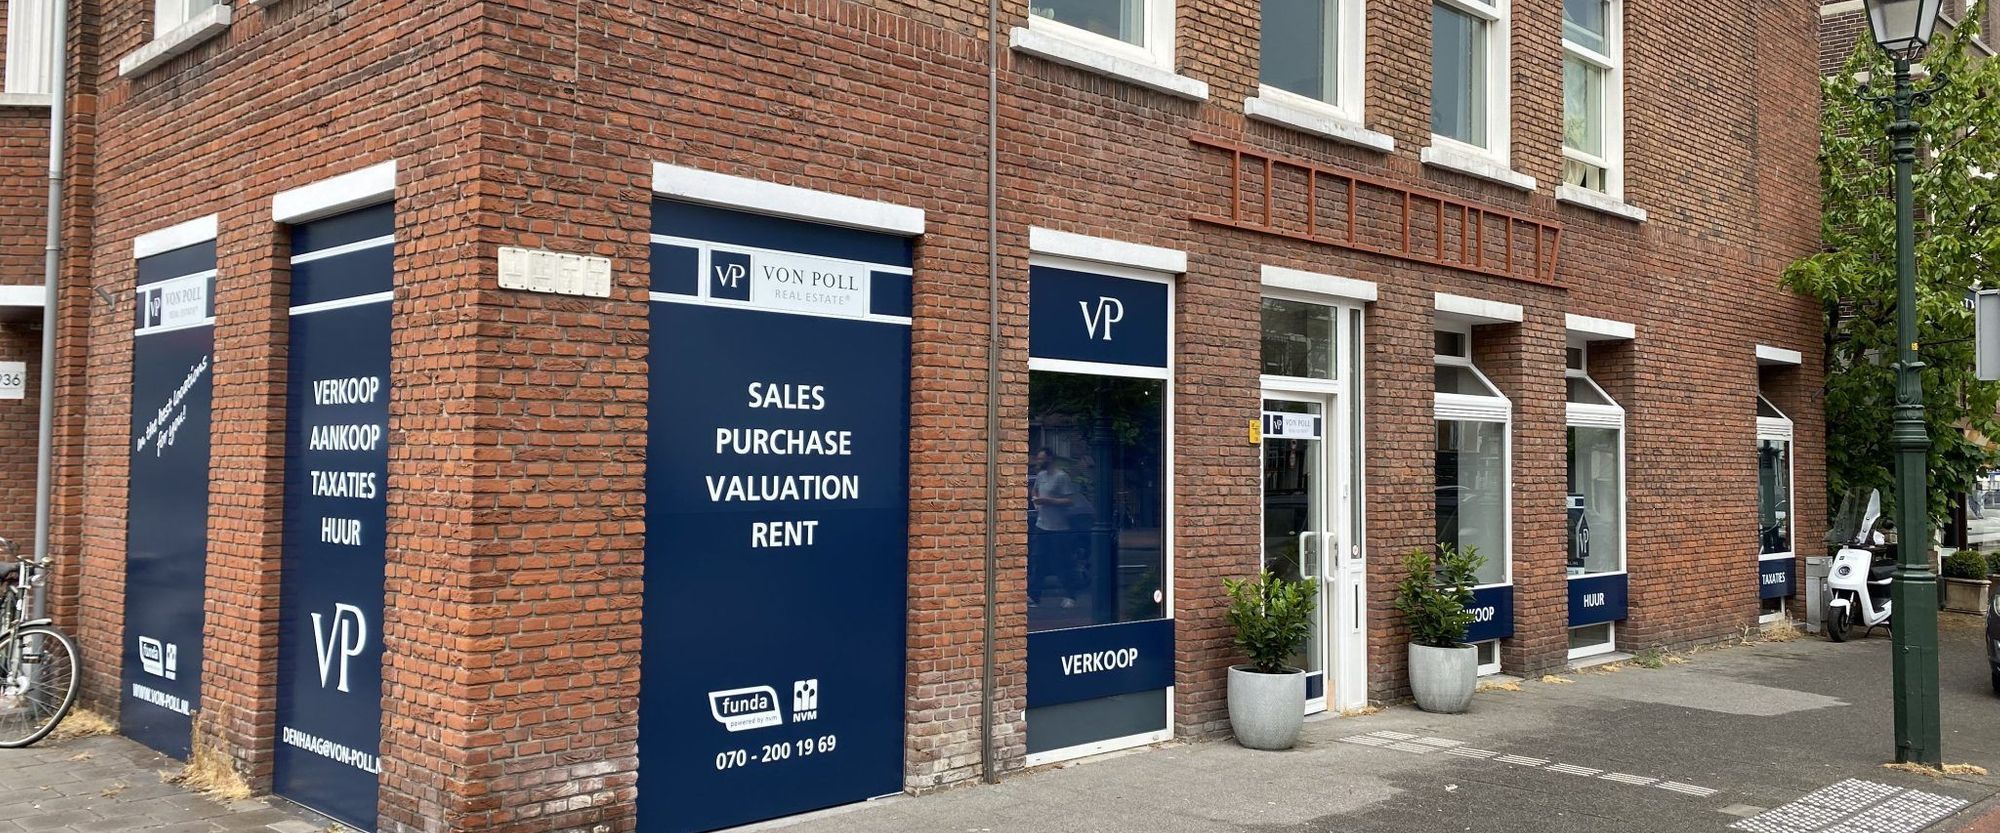 5 REASONS WHY VON POLL REAL ESTATE OPENED A 3RD DUTCH BRANCH IN THE HAGUE